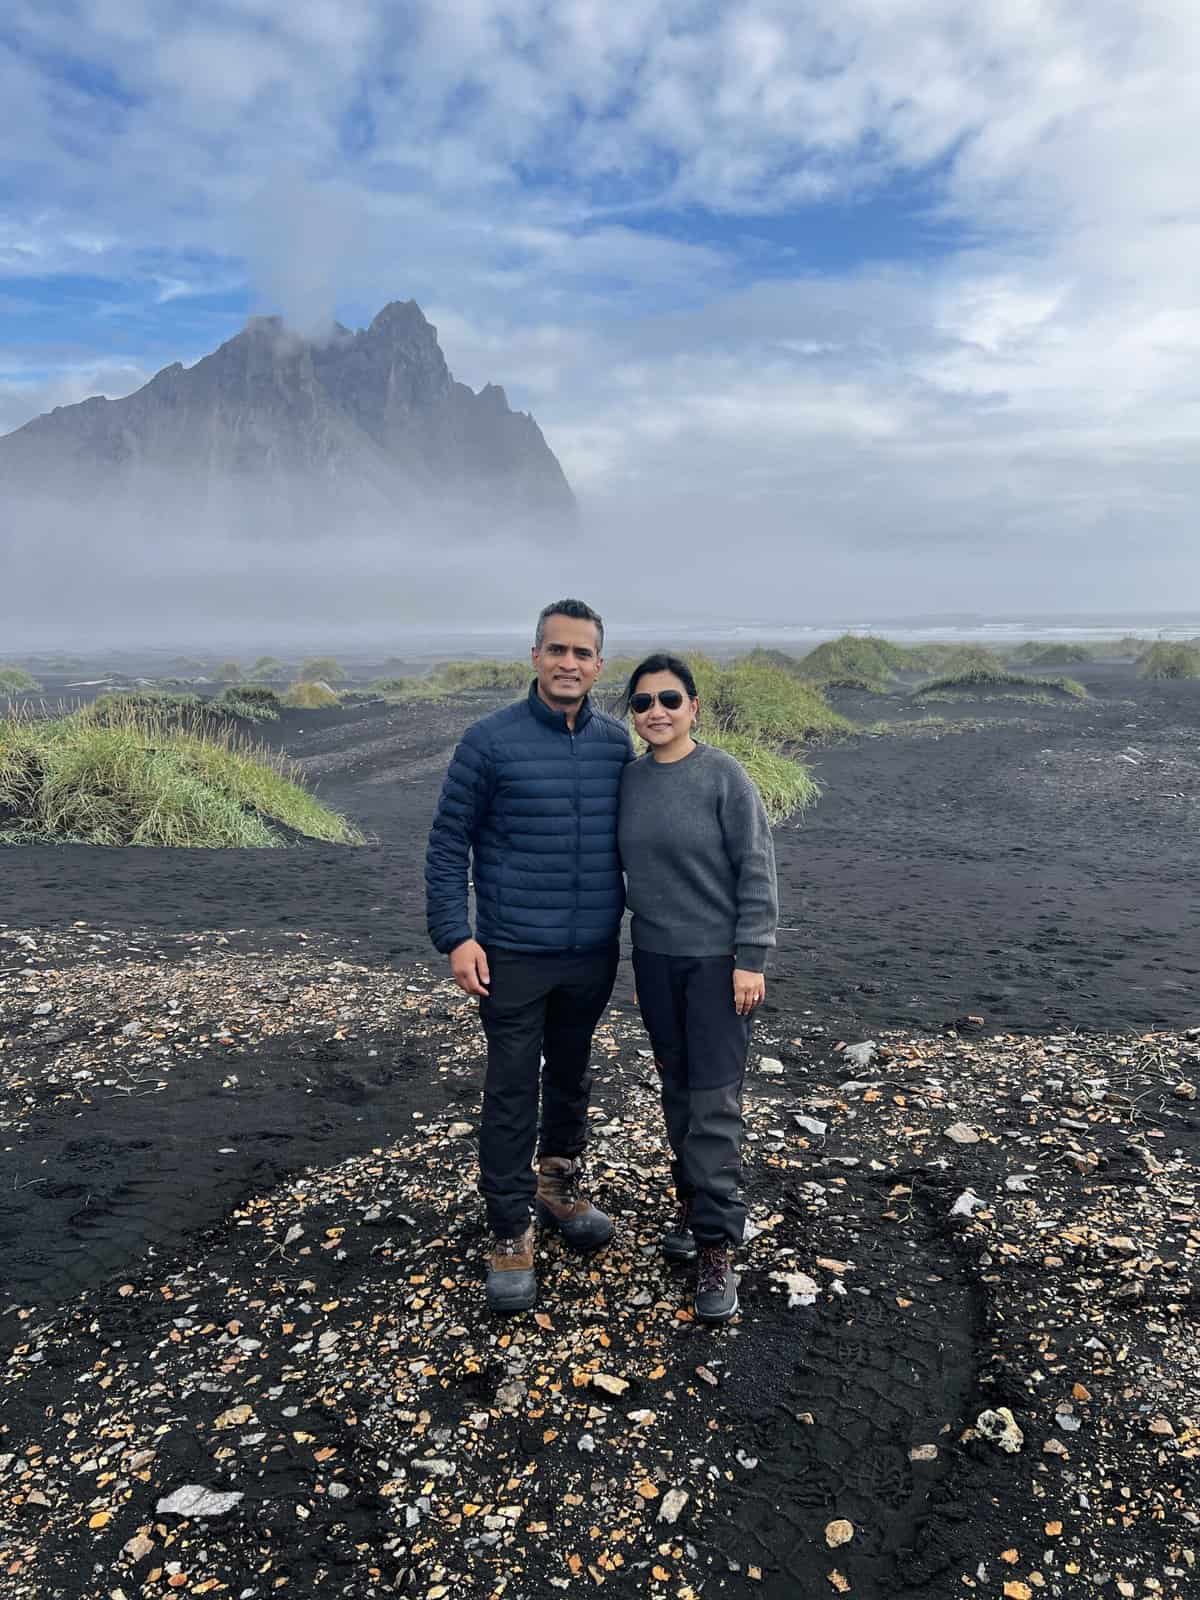 Photo in front of Mountains in Vestrahorn Iceland 